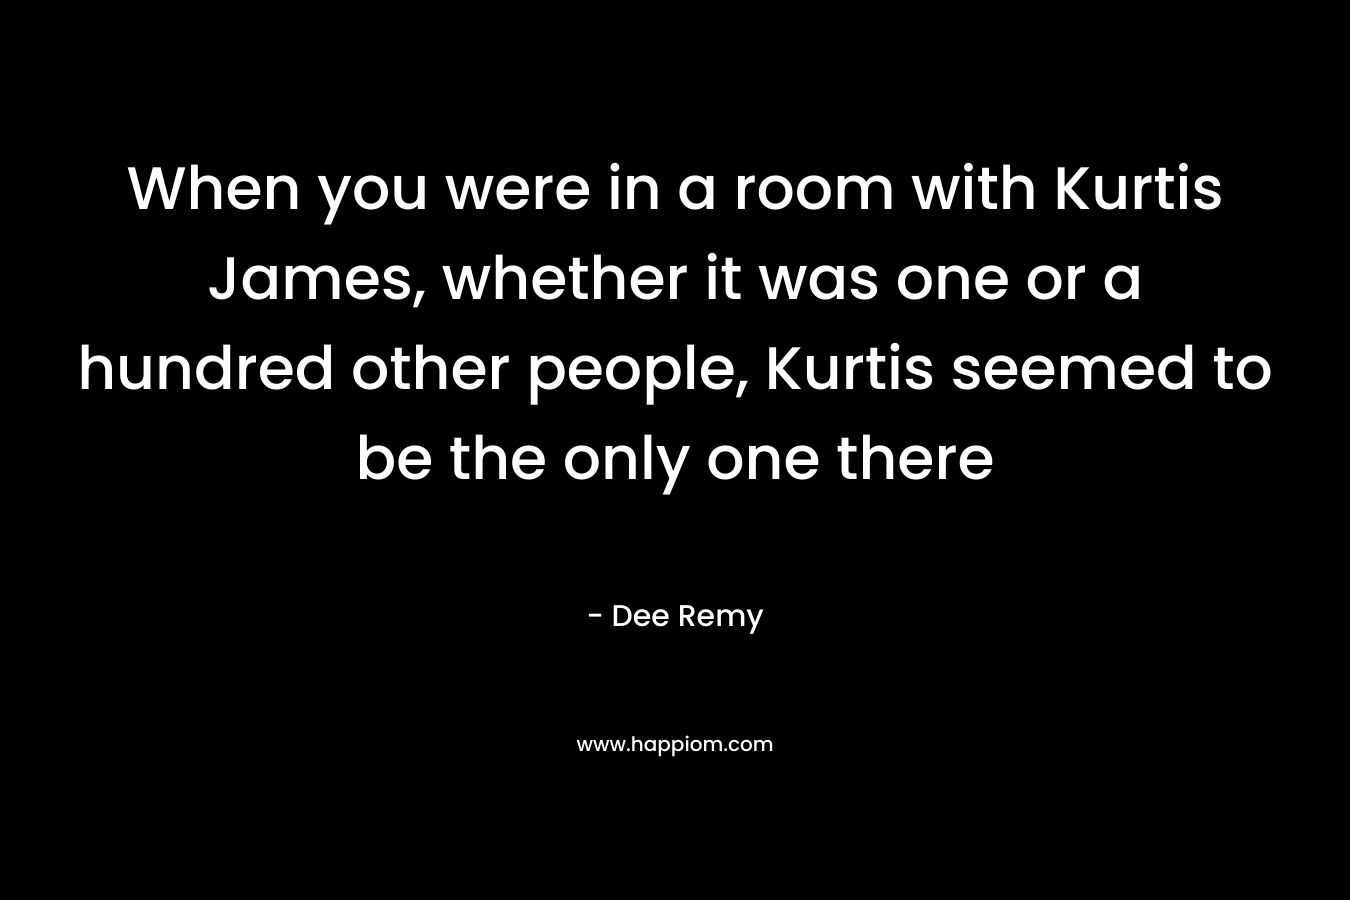 When you were in a room with Kurtis James, whether it was one or a hundred other people, Kurtis seemed to be the only one there – Dee Remy